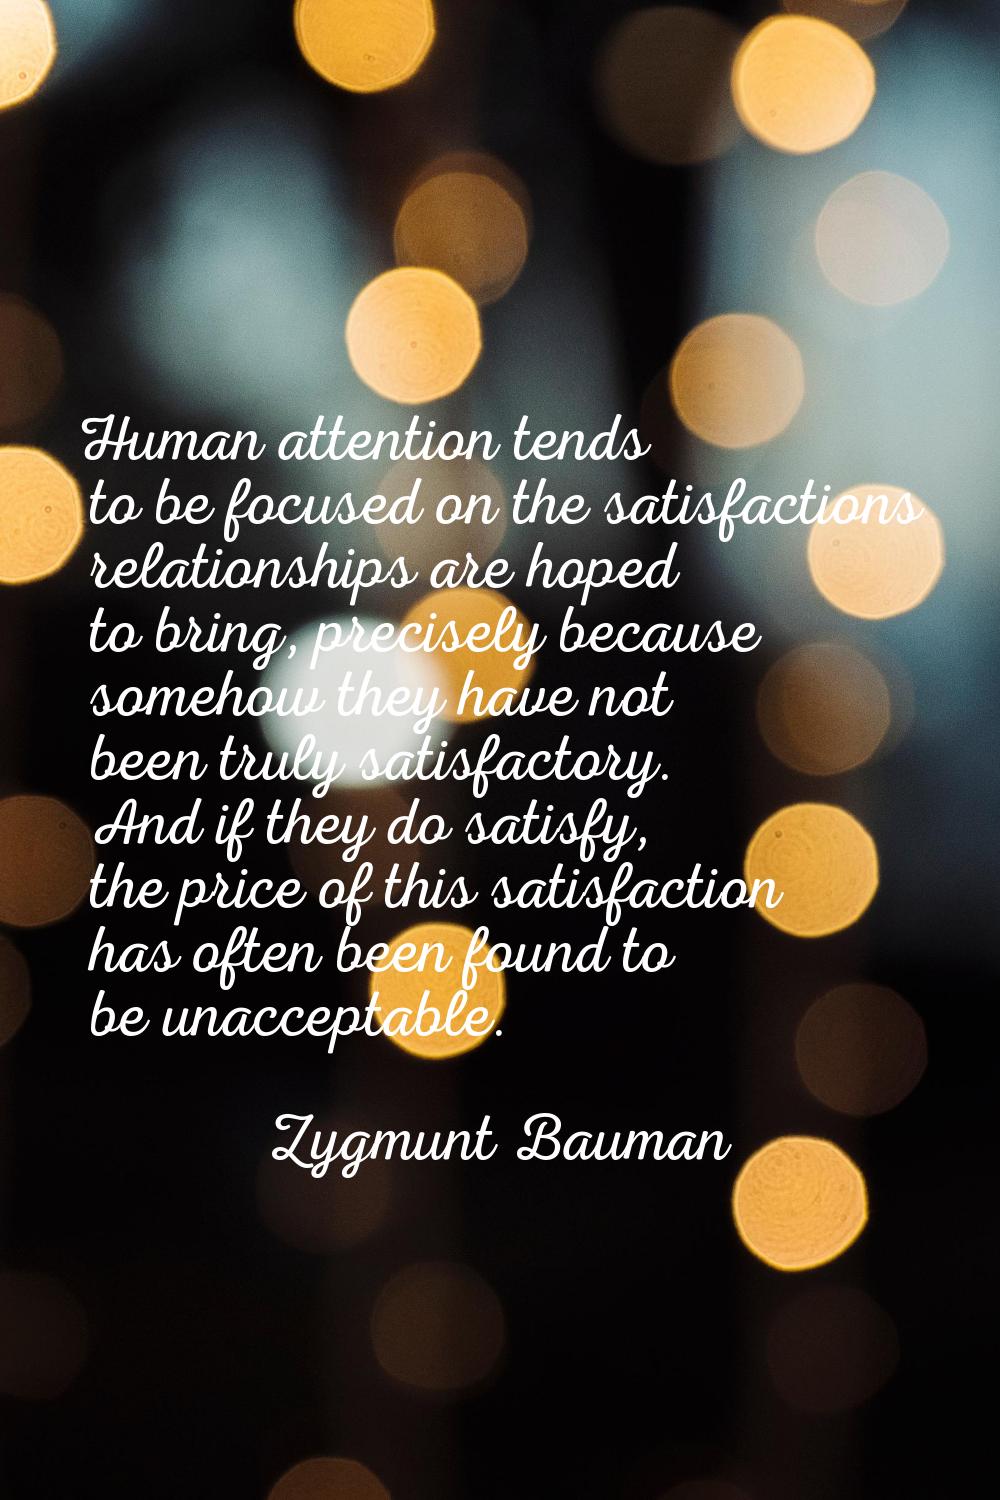 Human attention tends to be focused on the satisfactions relationships are hoped to bring, precisel